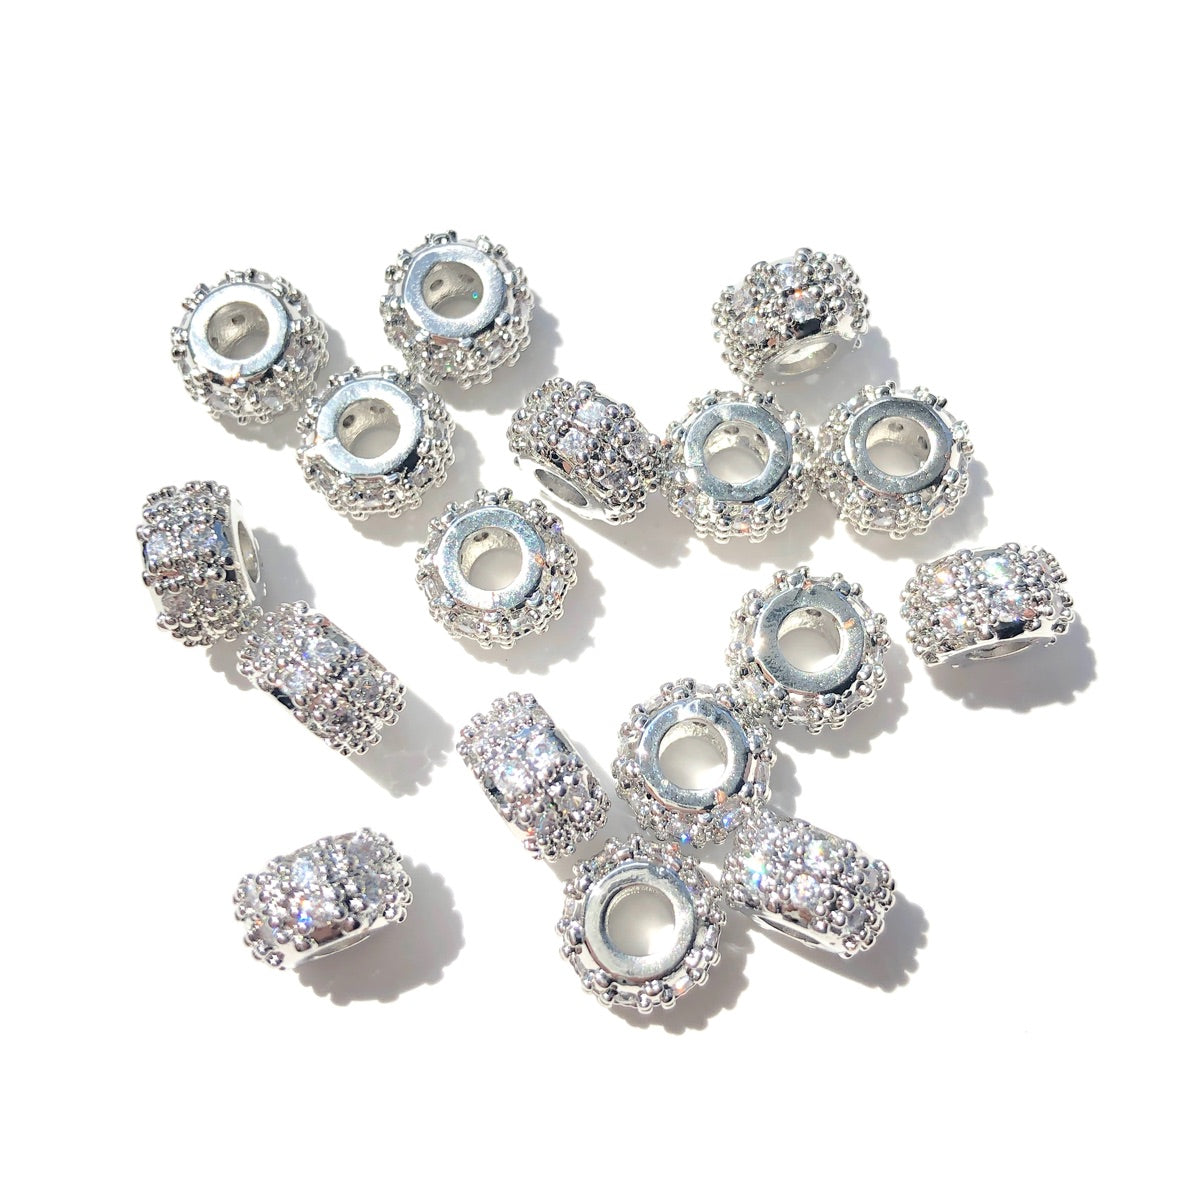 10-20-50pcs/lot 8mm CZ Paved Rondelle Wheel Spacers Silver CZ Paved Spacers New Spacers Arrivals Rondelle Beads Wholesale Charms Beads Beyond